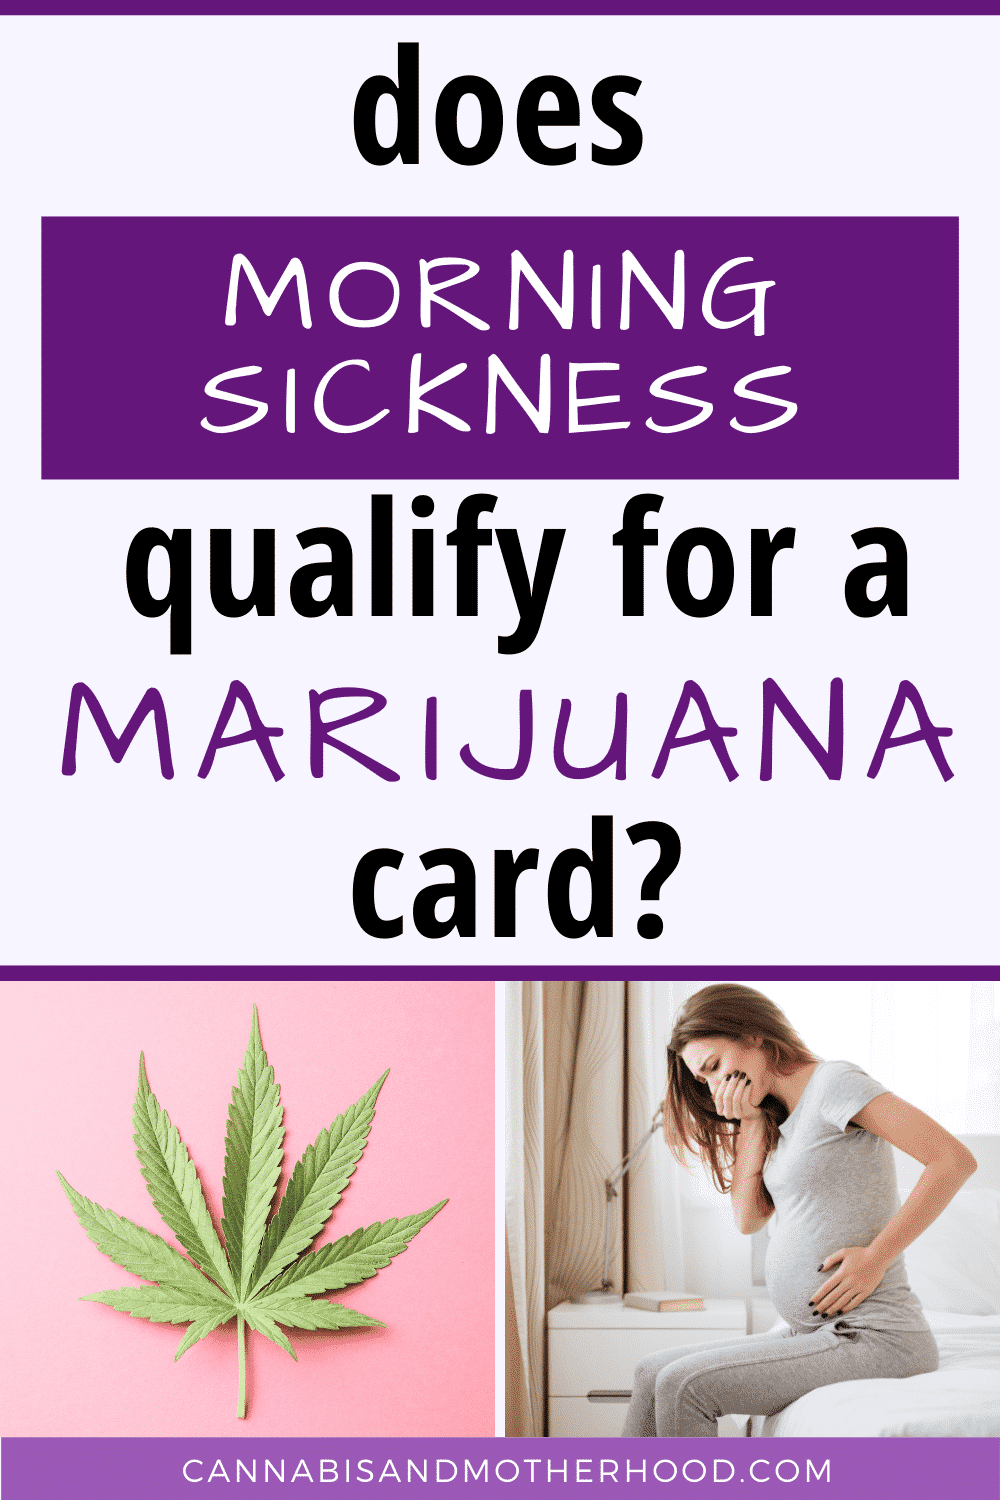 can pregnant women qualify for a medical marijuana card due to nausea?